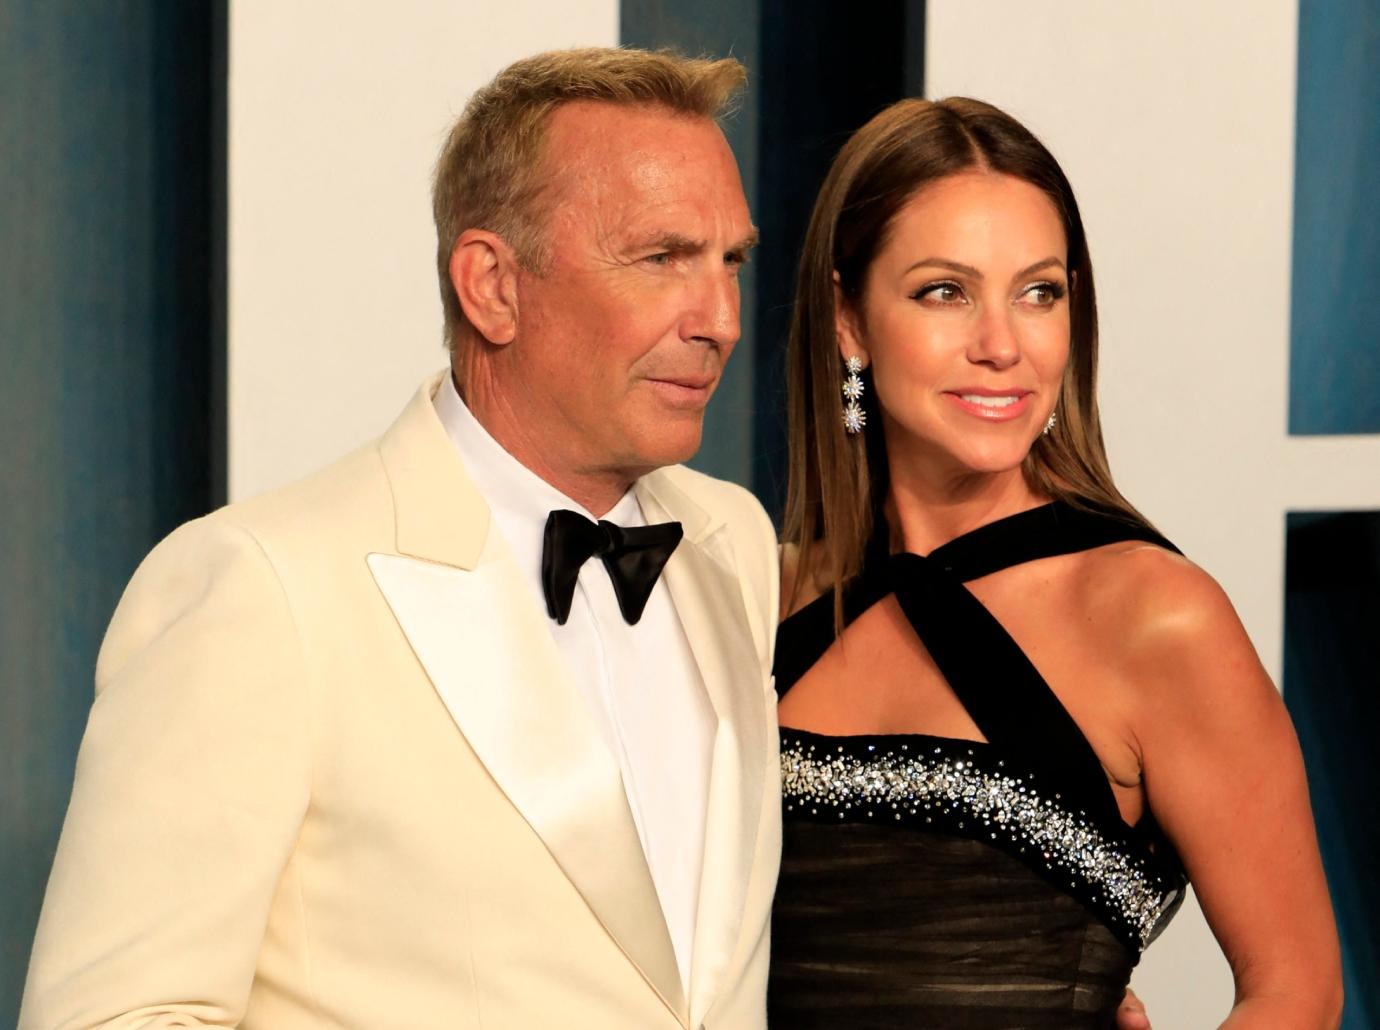 Kevin Costner Didn't 'Expect' Romance With Jewel After Painful Divorce